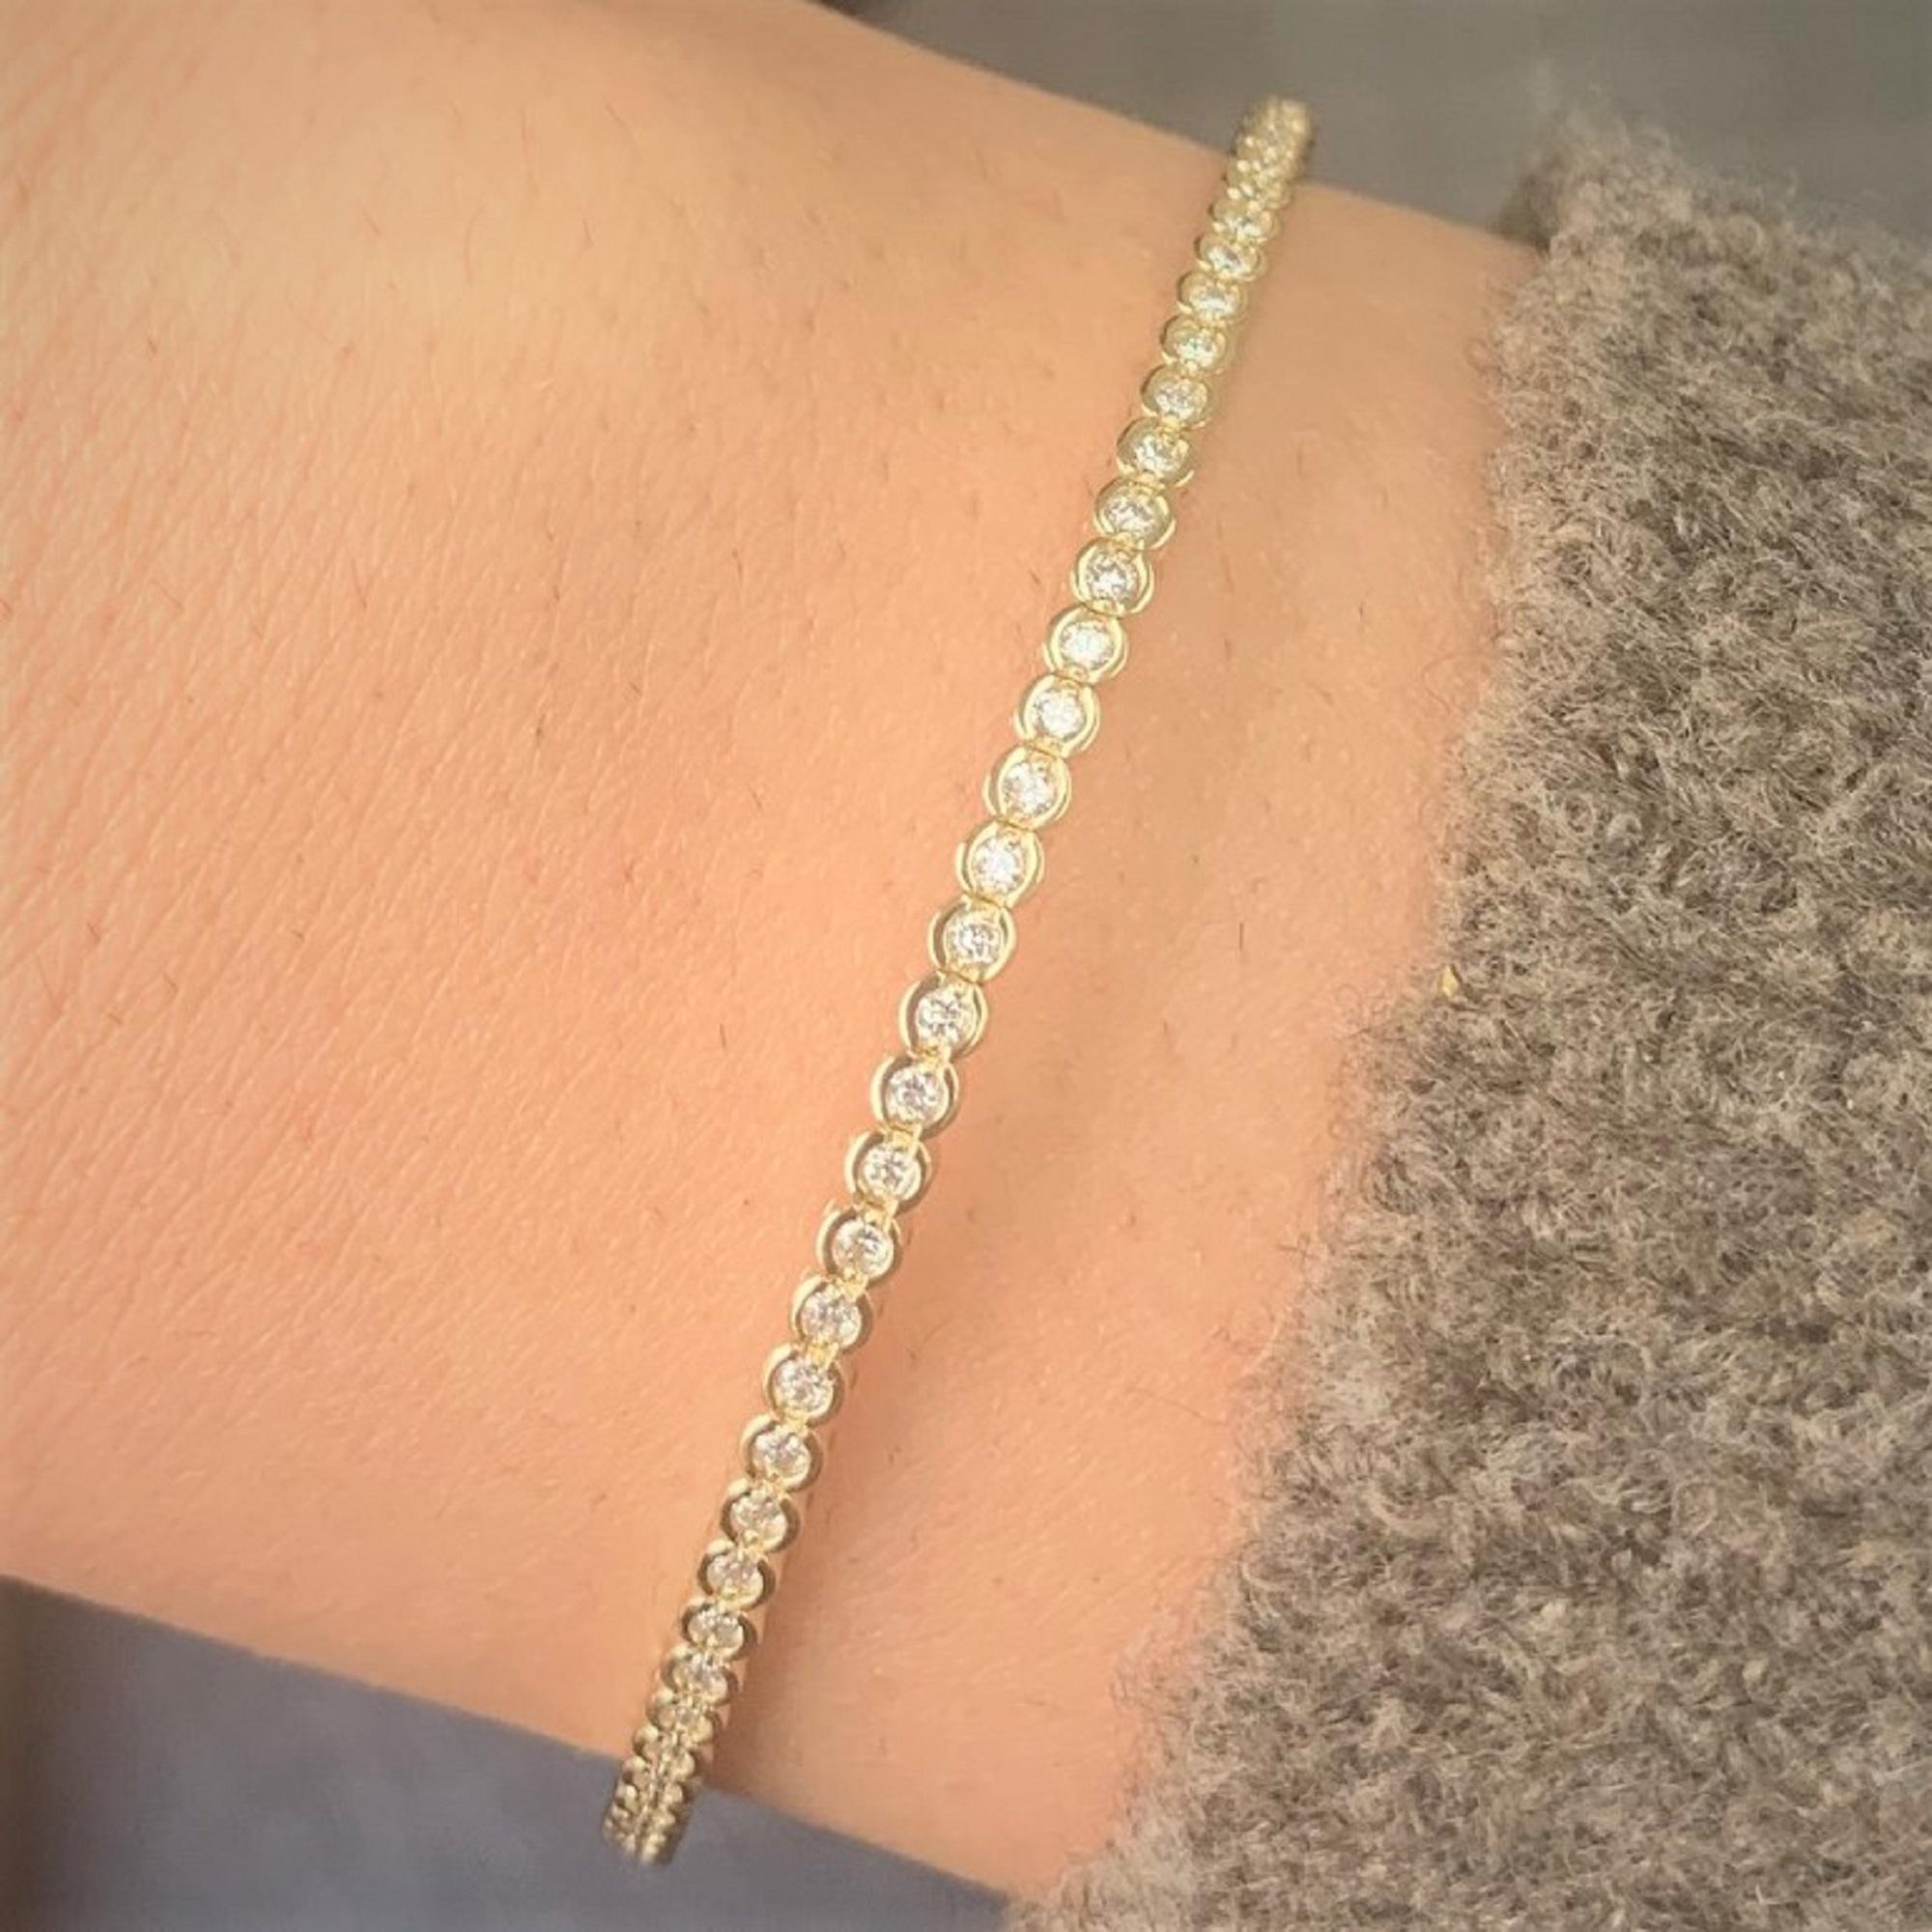 Quality Stackable Bangle: Made from real 14k gold and 80 glittering white approximately 0.96 ct. Certified diamonds, featuring a single row of white diamonds flexible diameter for comfort with a color and clarity of GH-SI
 Surprise Your Loved One